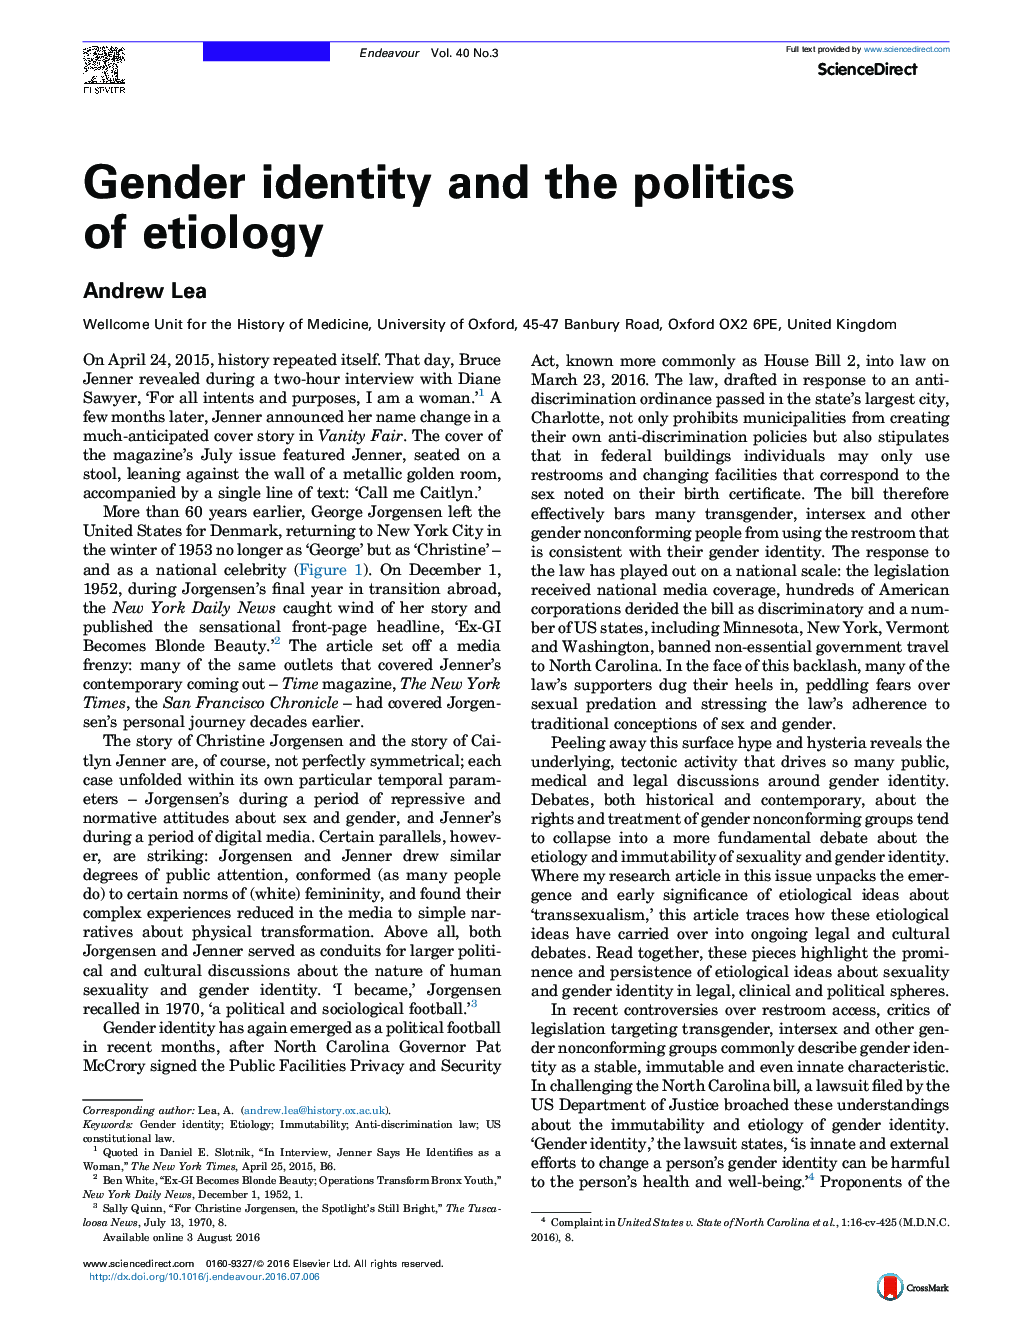 Gender identity and the politics of etiology